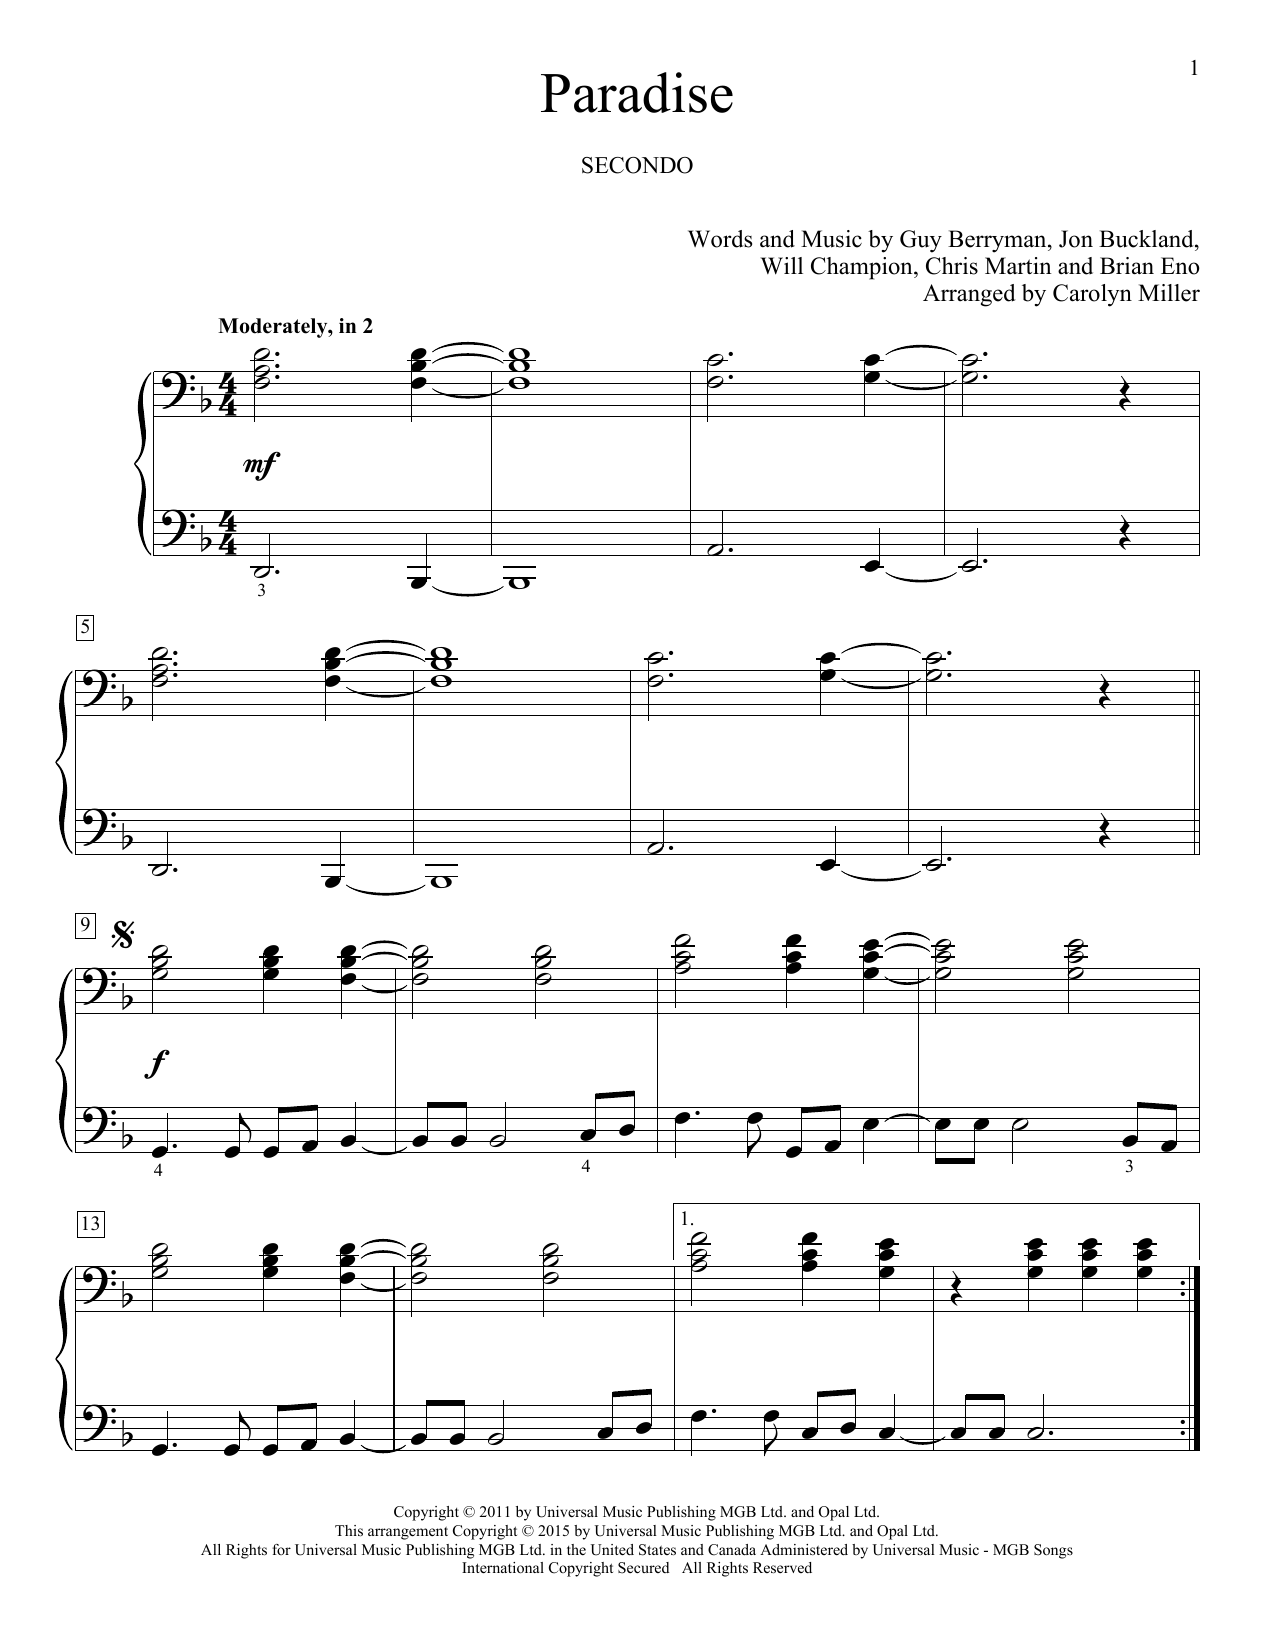 Coldplay Paradise sheet music notes and chords. Download Printable PDF.